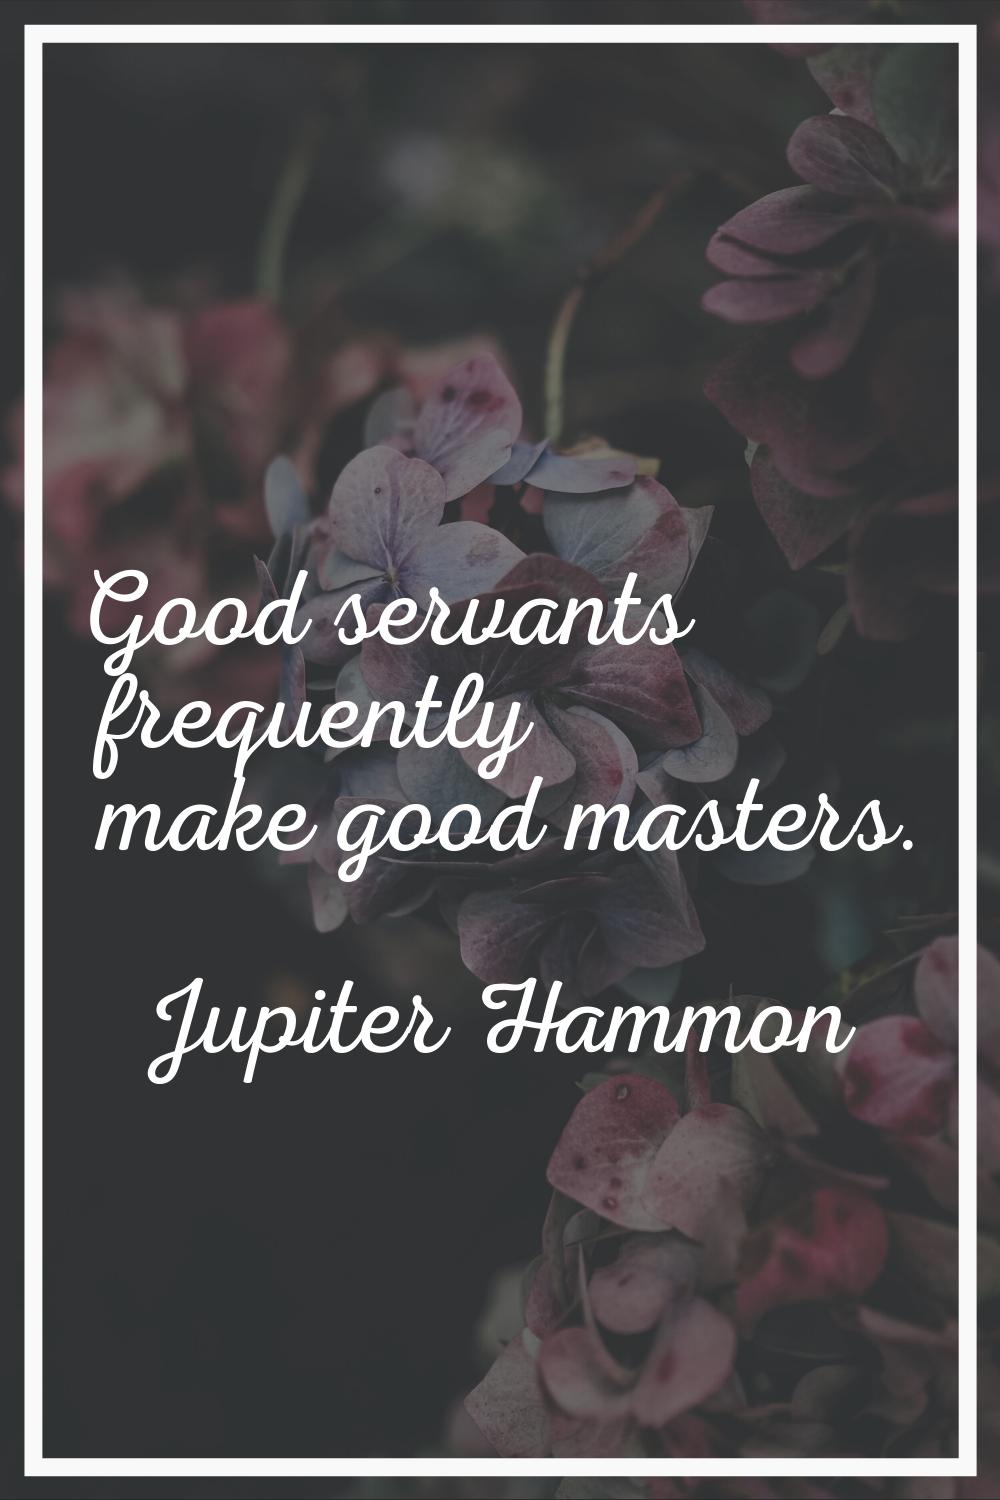 Good servants frequently make good masters.